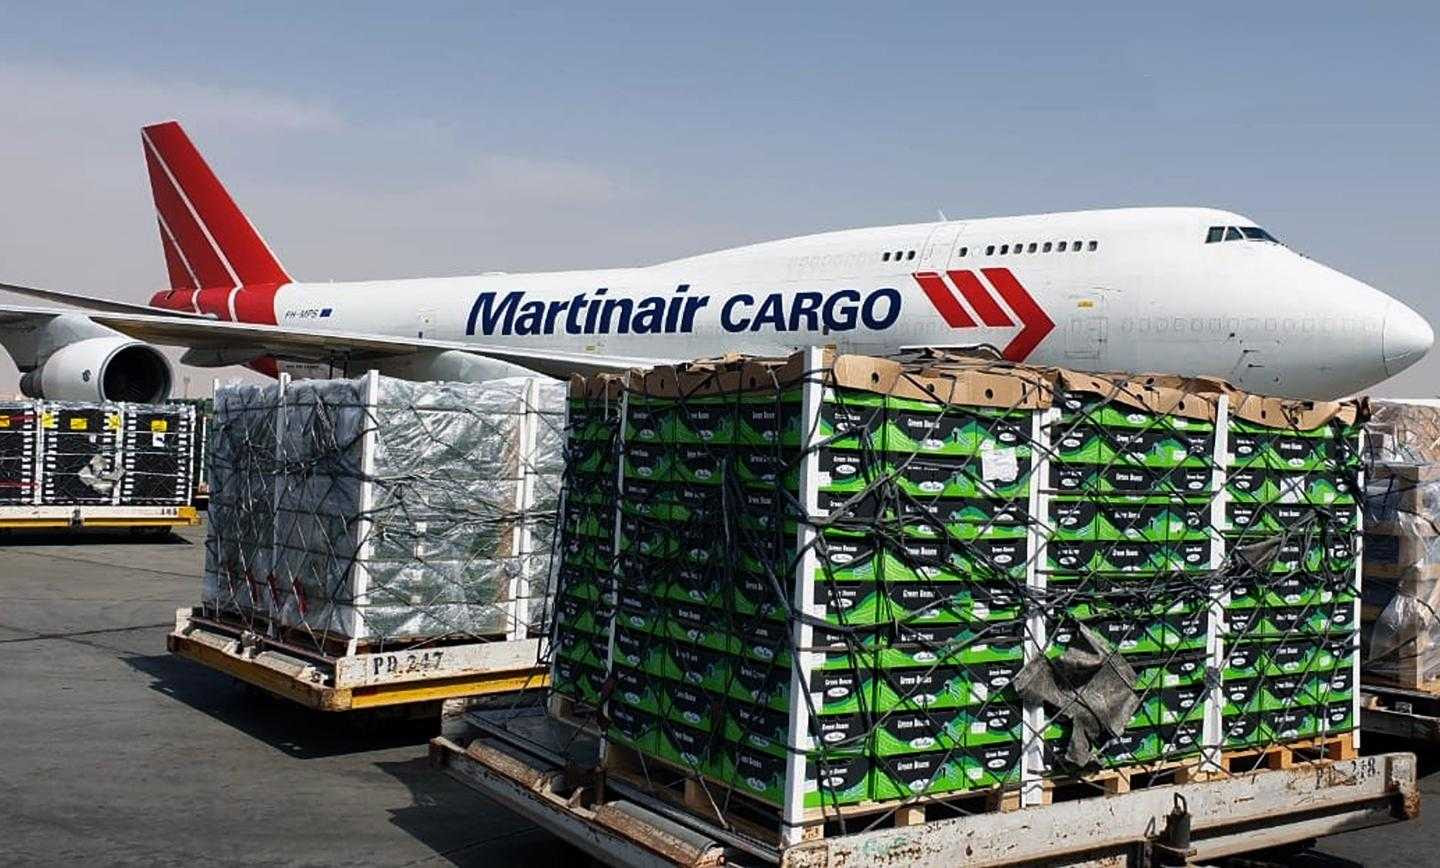 Martinair Cargo flies a weekly freighter on the Amsterdam-Cairo route carrying fresh, pharma and aerospace